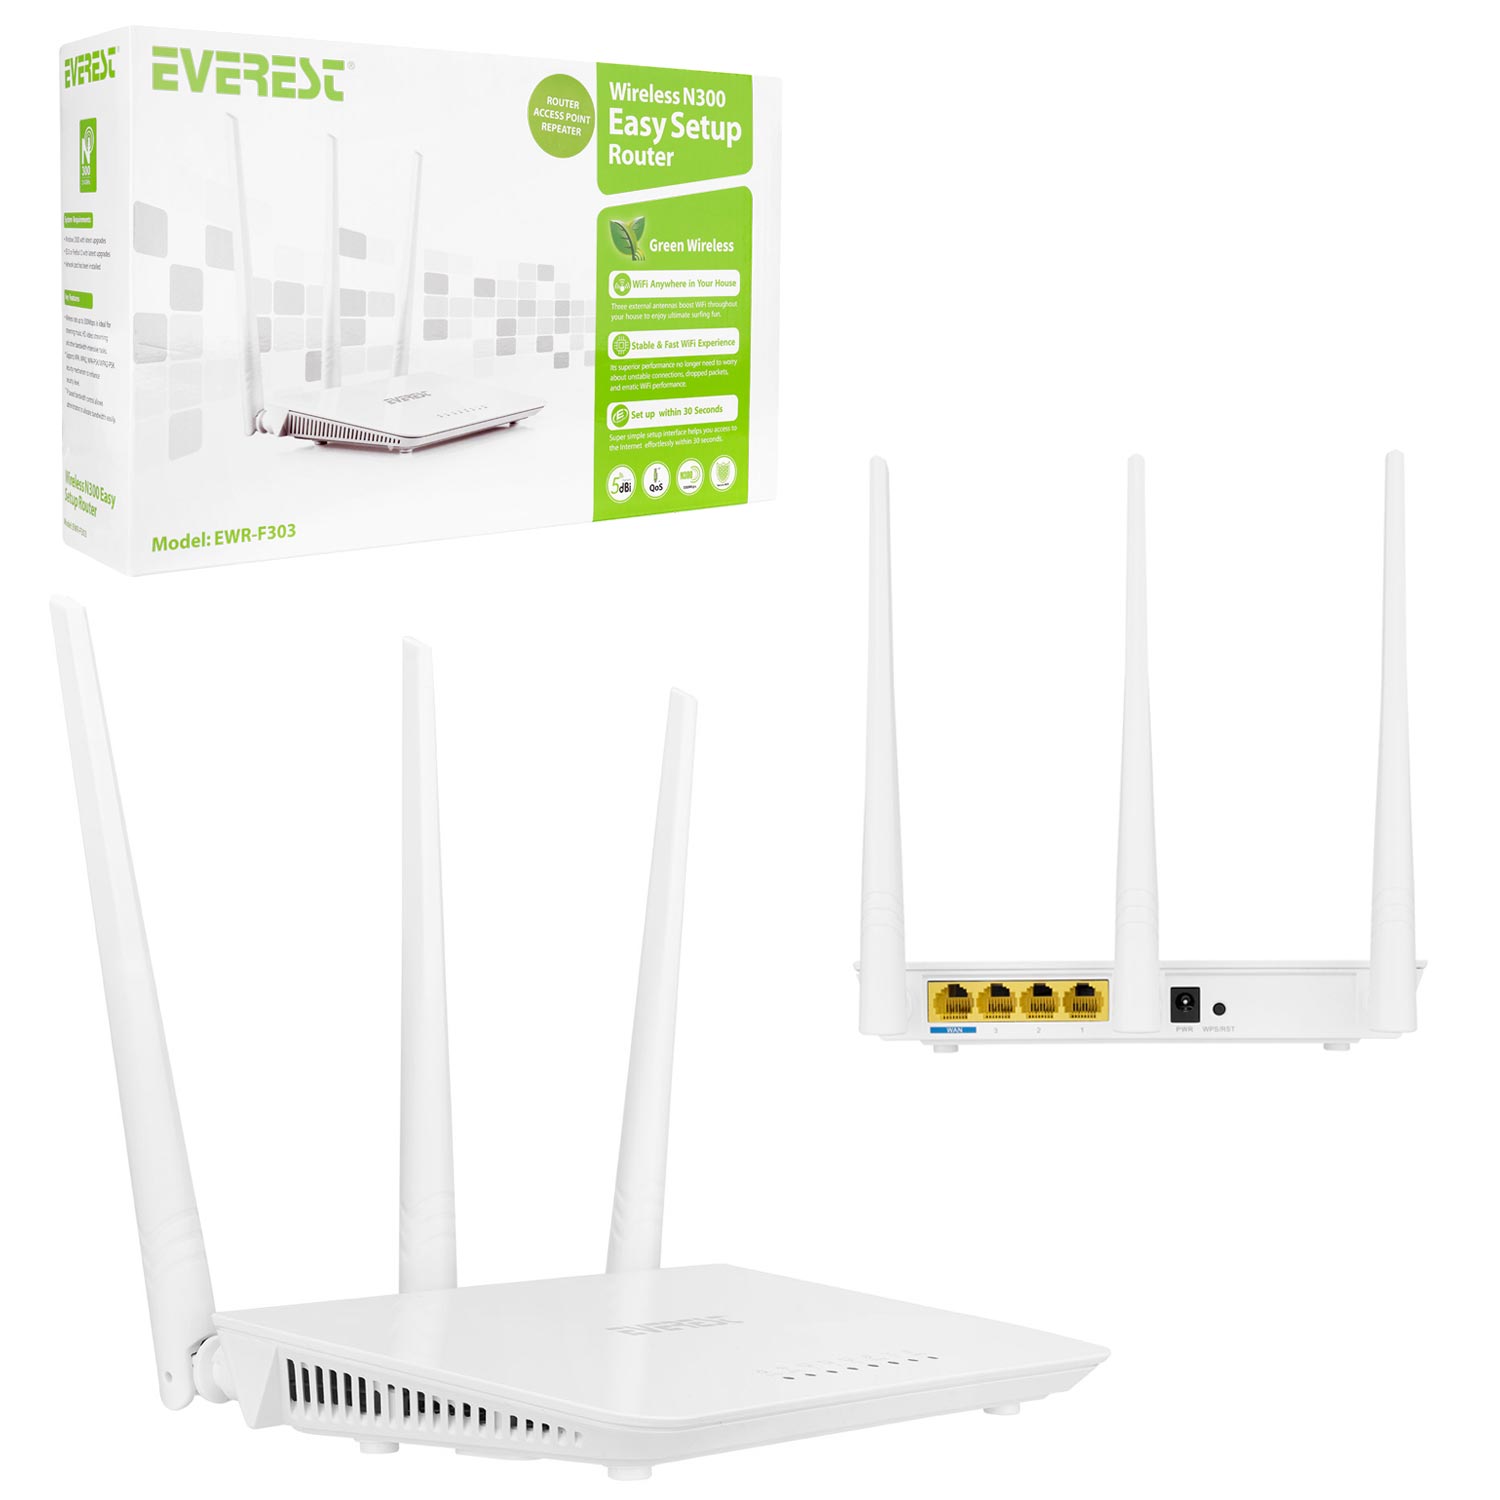 ACCESS POINT REPEATER 4 PORT 300 MBPS EVEREST EWR-F303